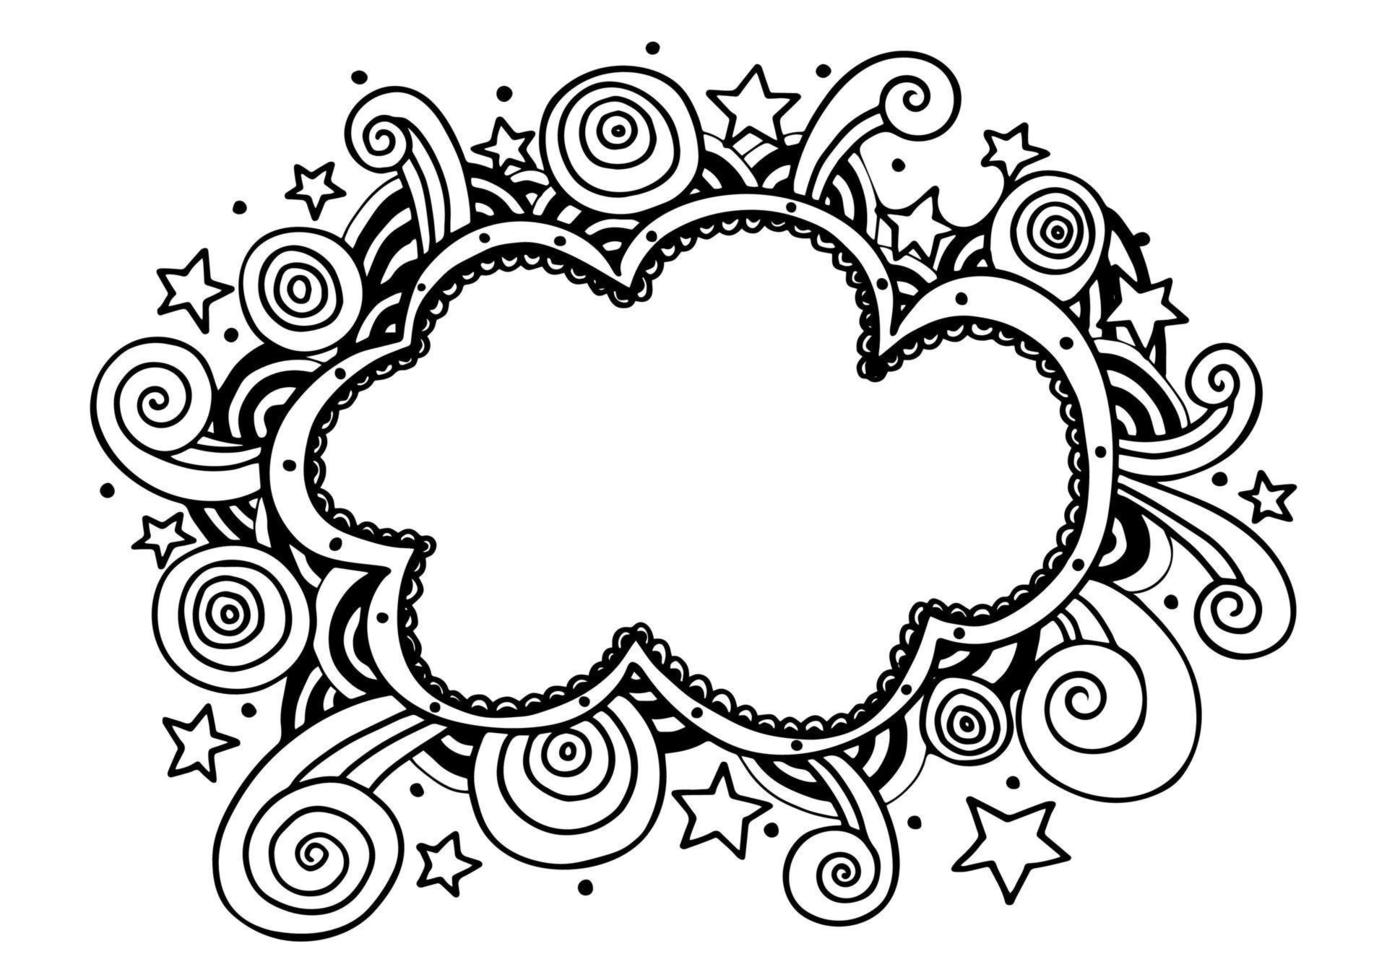 Doodle frame drawing vector